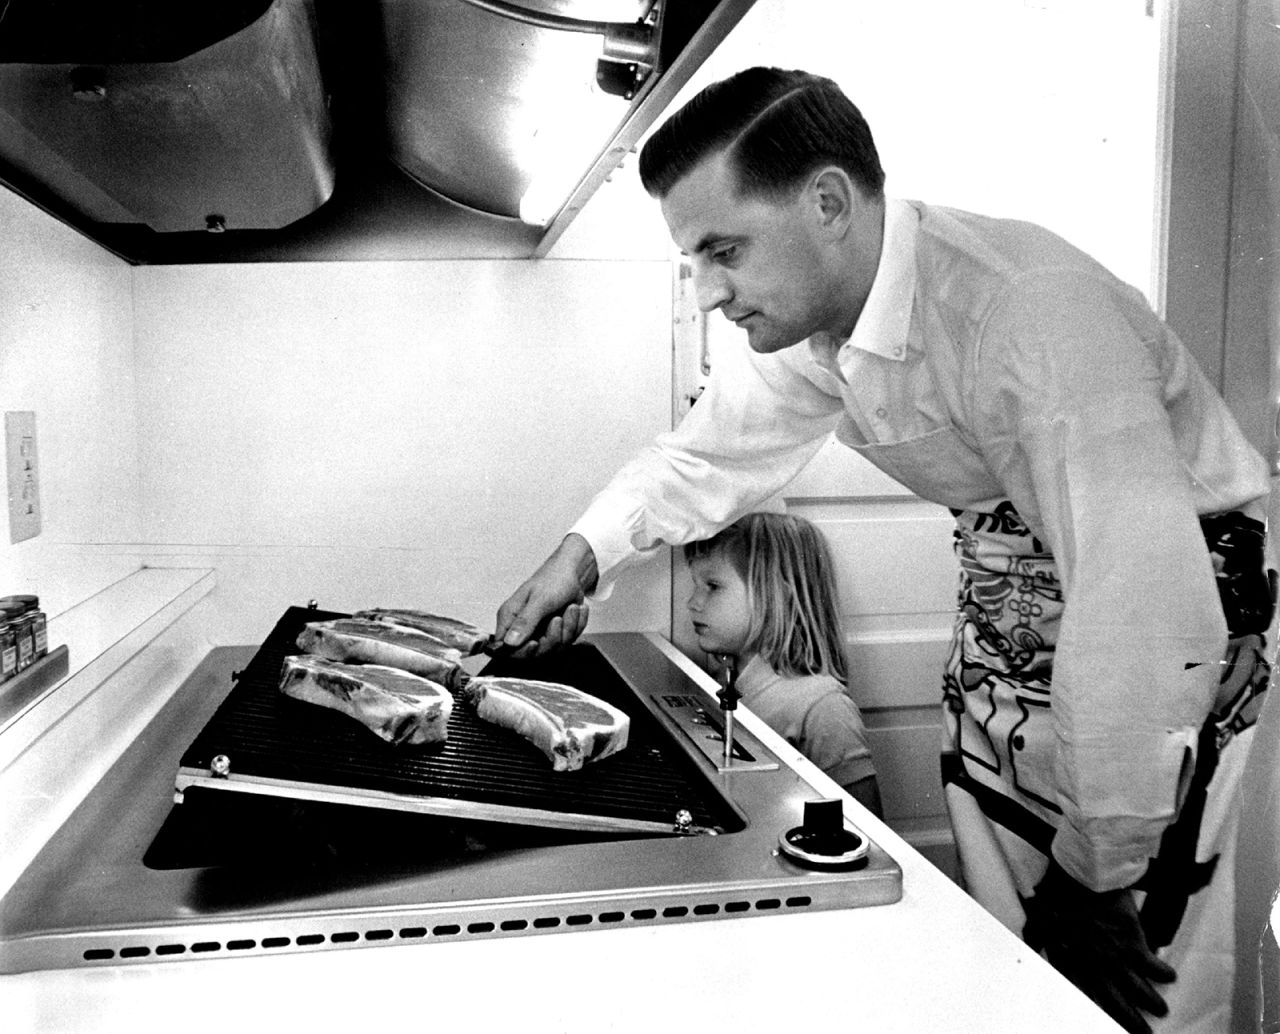 Mondale and his 4-year-old daughter Eleanor cook steaks in his family's new kitchen in Minneapolis on June 20, 1964.